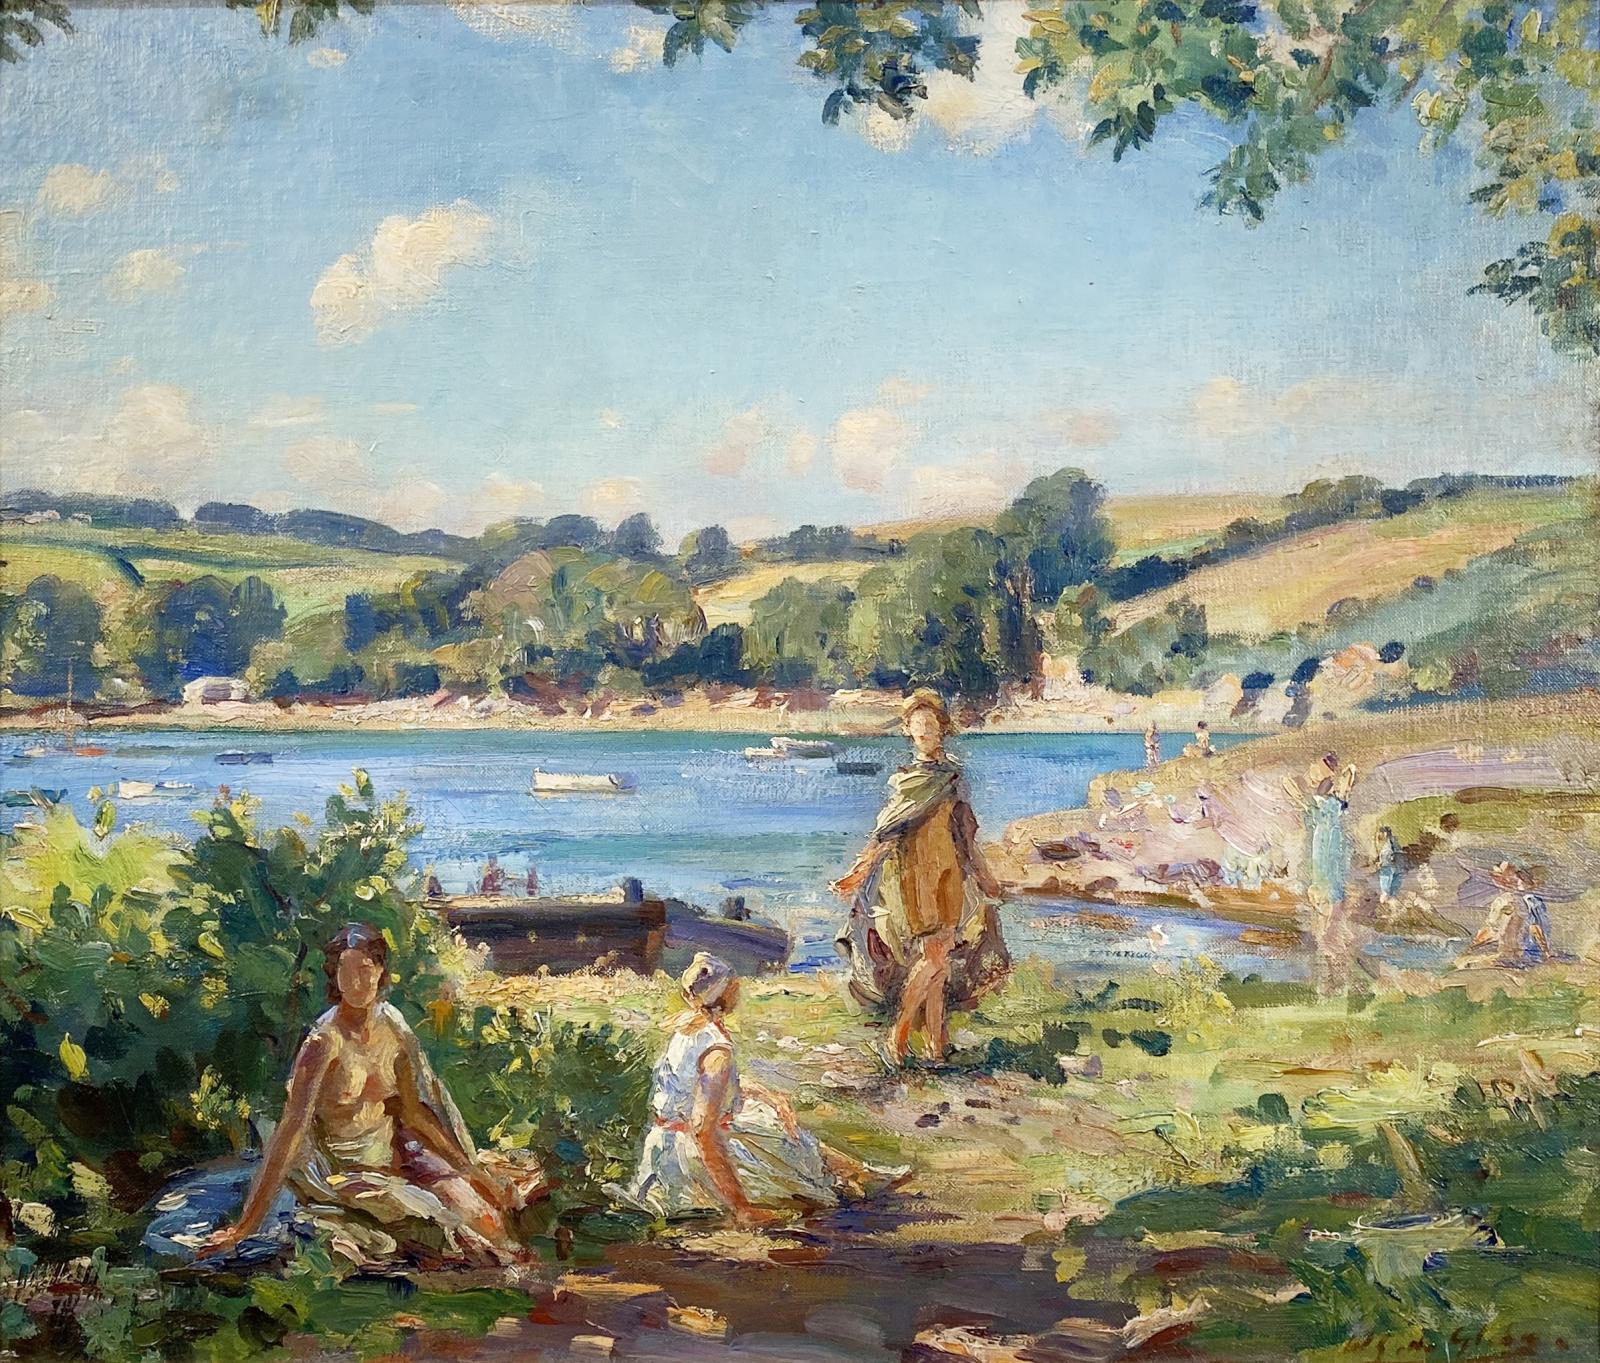 A bright landscape painted impressionistically featuring a lake, mountains, and figures in the foreground